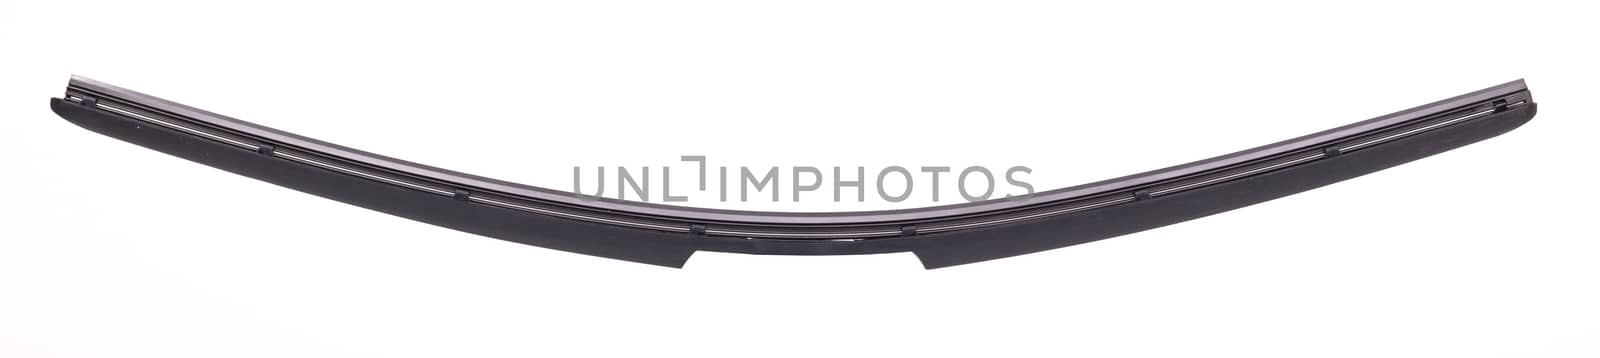 Windscreen wiper isolated on a white background